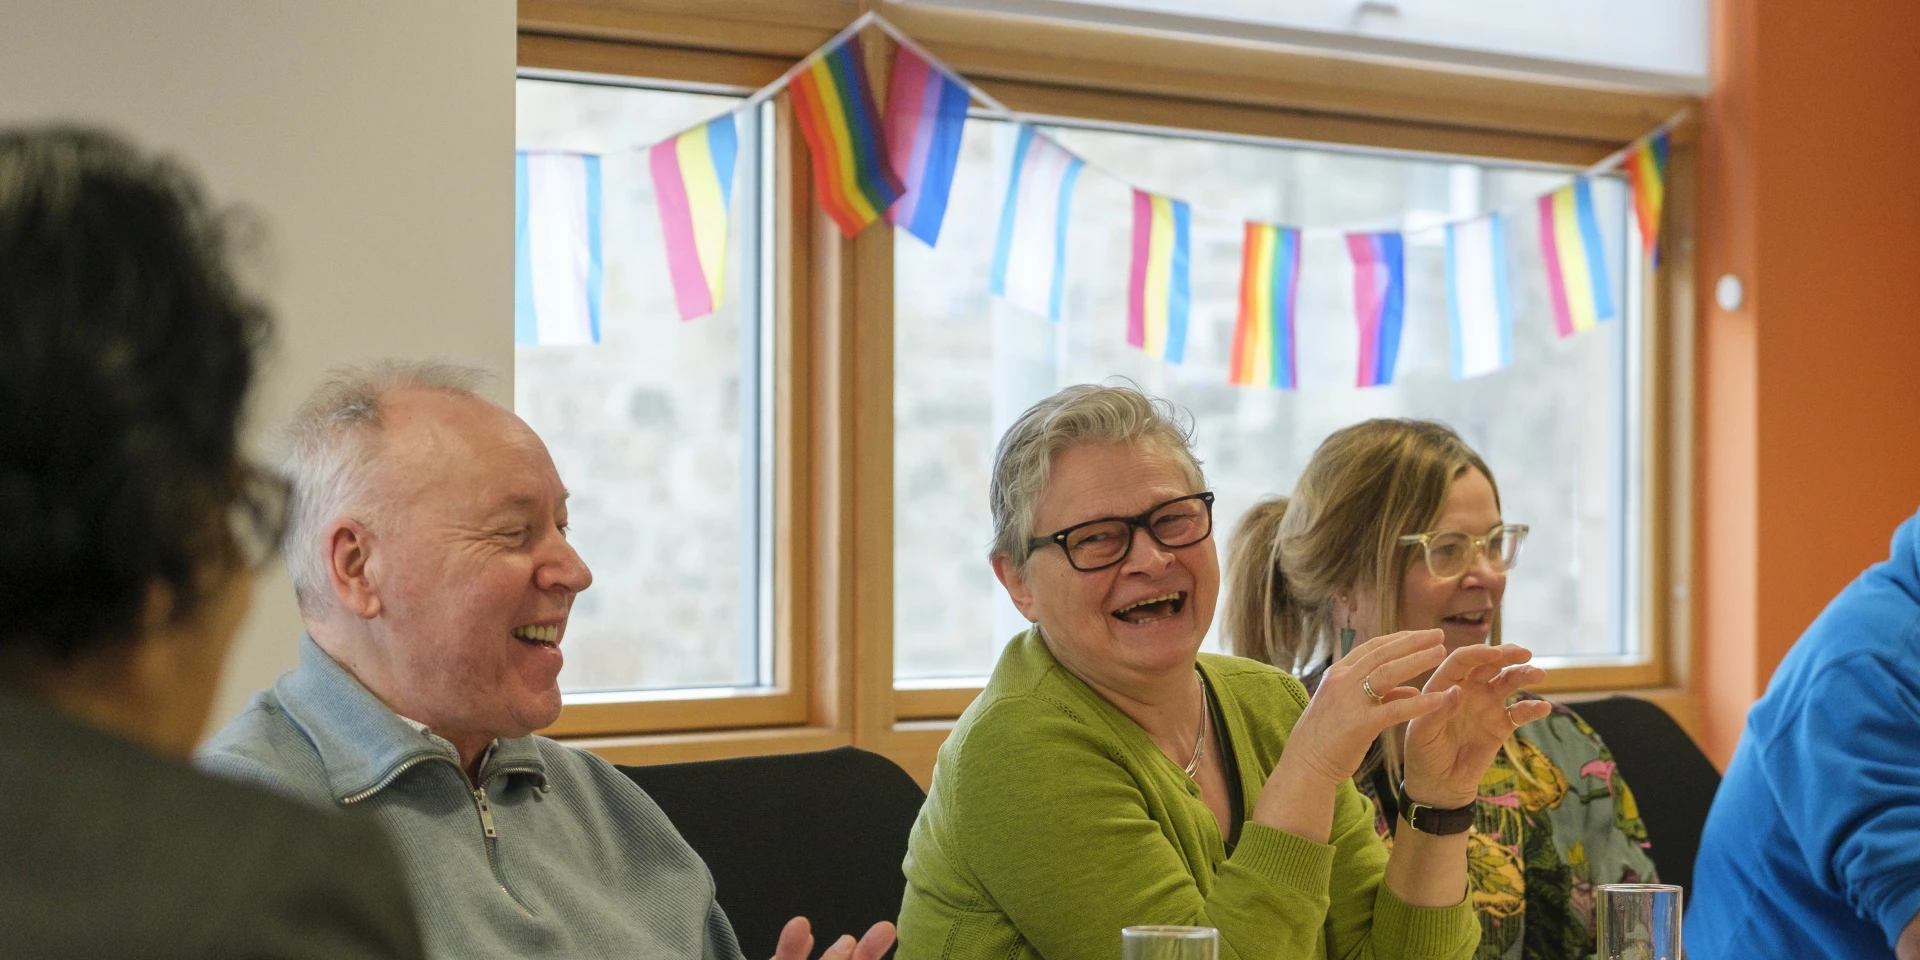 Discussing issues at the LGBTQ+ Older People's Network